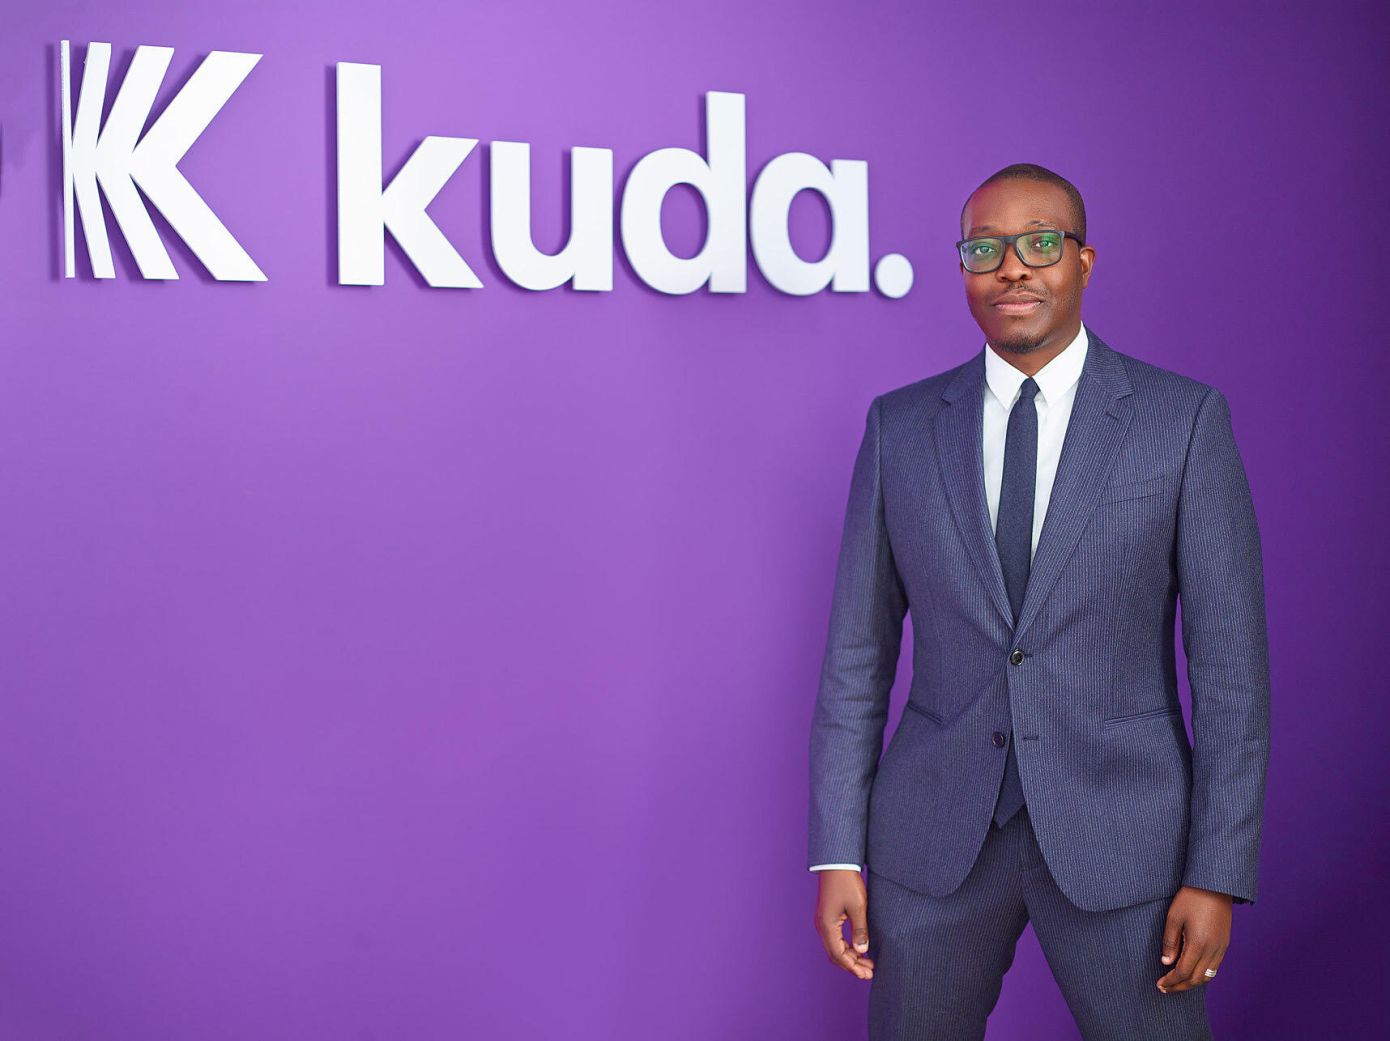 Kuda chief executive officer (CEO) and co-founder Babs Ogundeyi